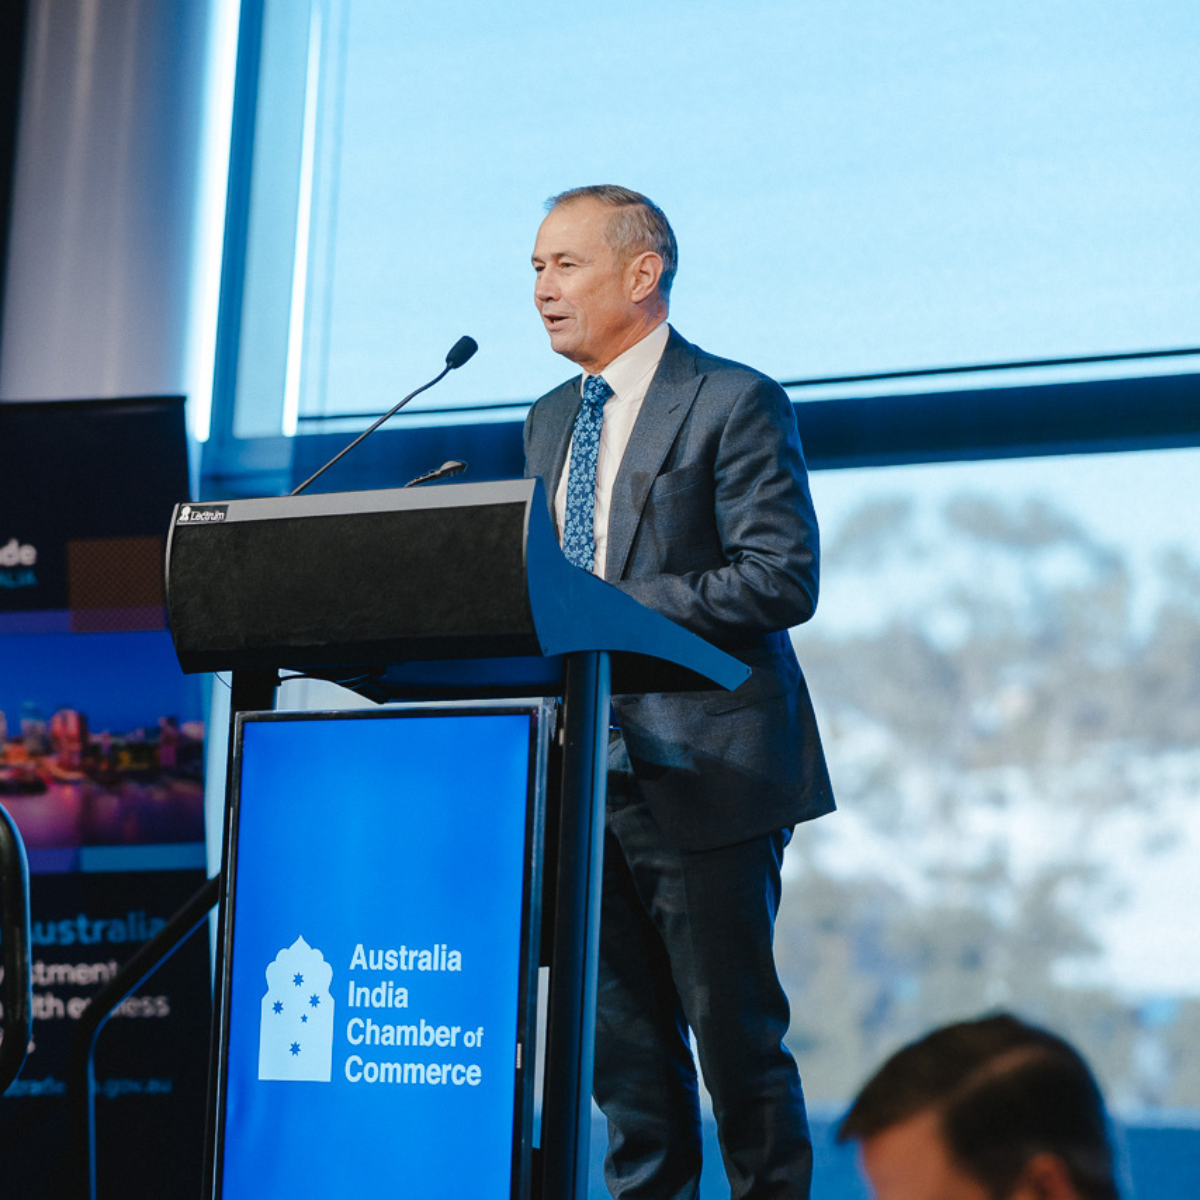 WA Premier Roger Cook delivering the opening address at the Australian Indian Chamber of Commerce (AICC) National Conference 2023